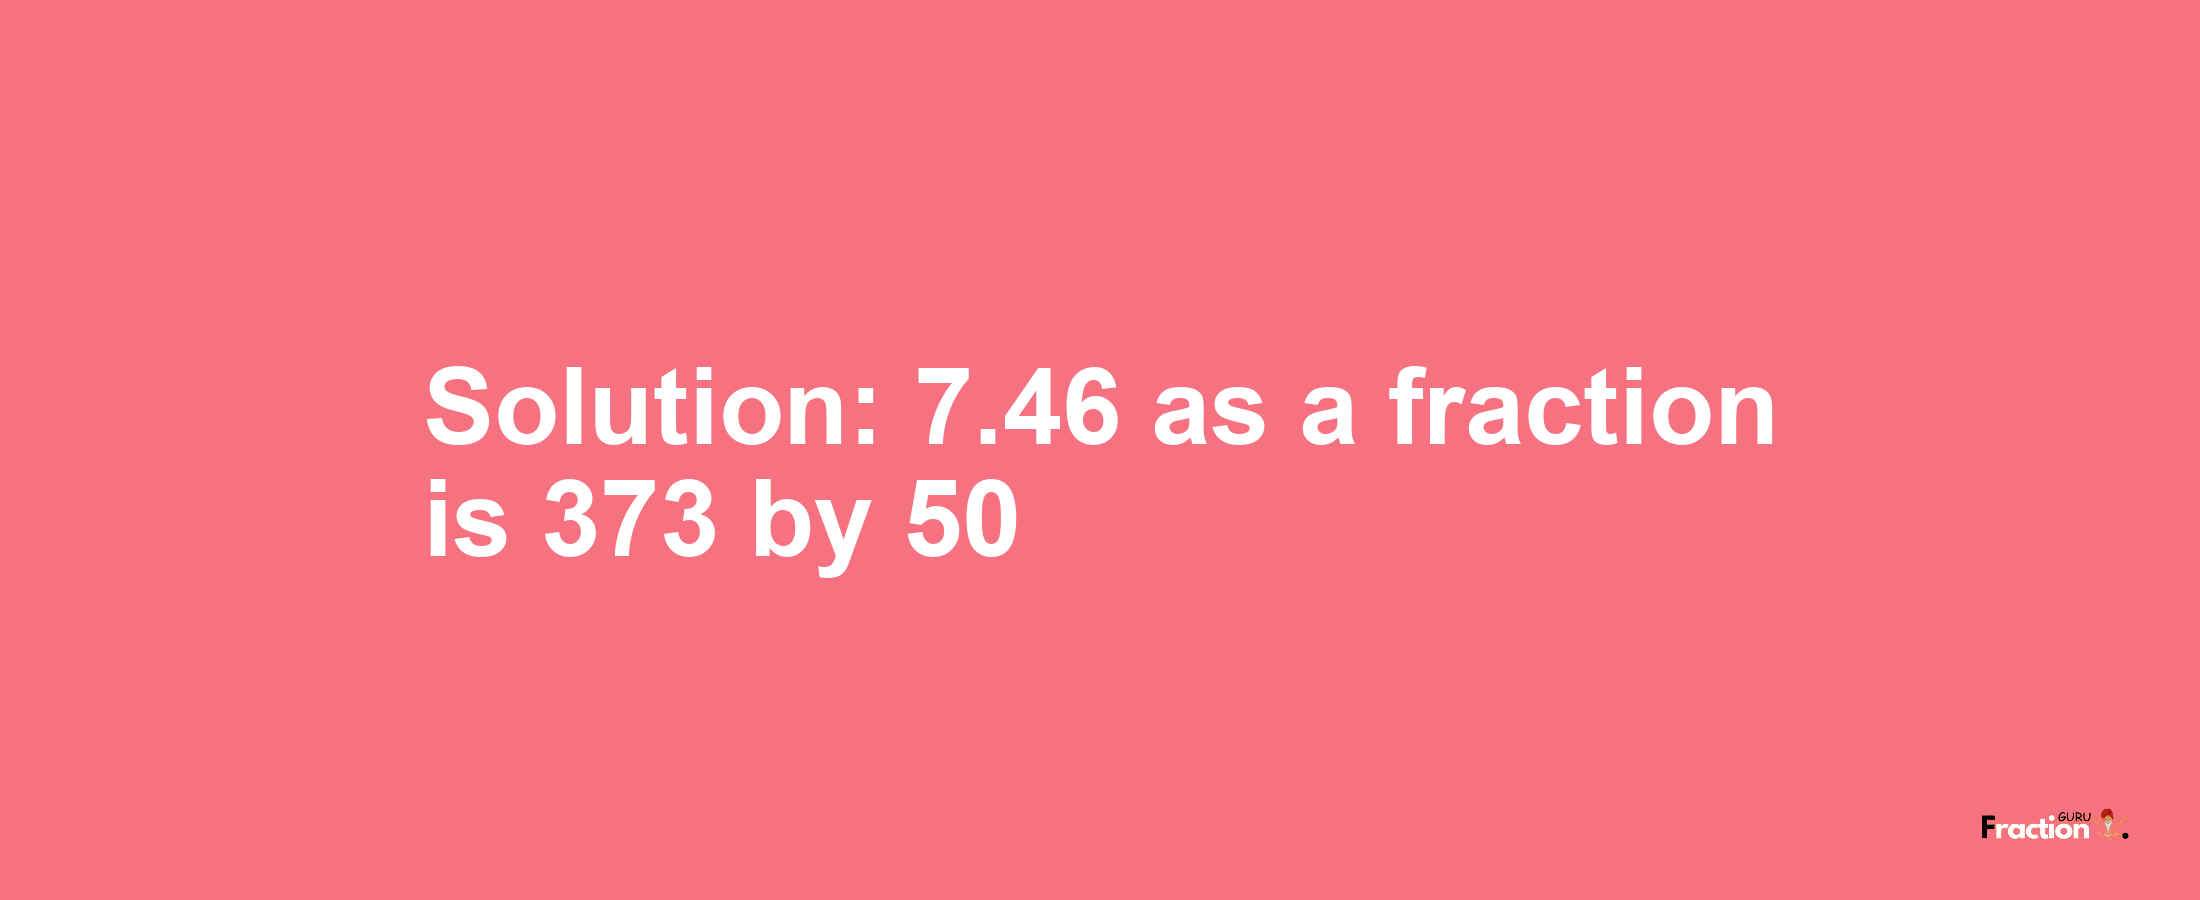 Solution:7.46 as a fraction is 373/50